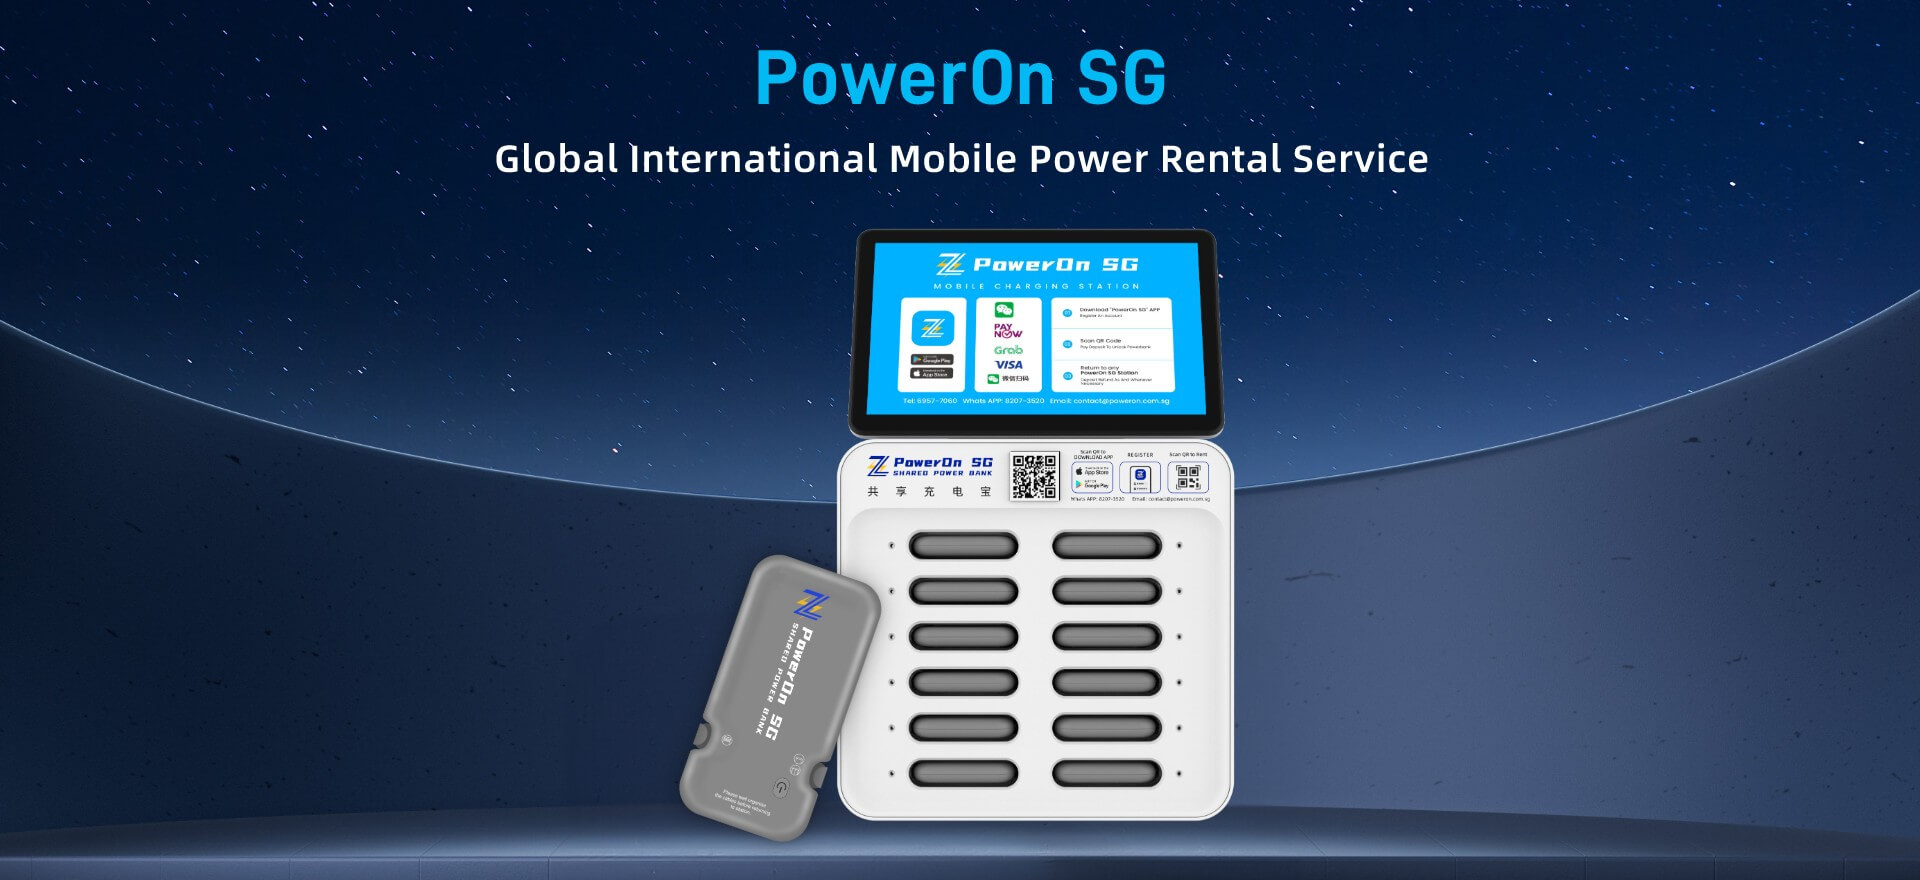 shared power bank singapore,shared charging station singapore,shared power rental singapore,shared charging service singapore,mobile power bank rental singapore,mobile power bank rental singapore,power bank rental singapore,poweron sg